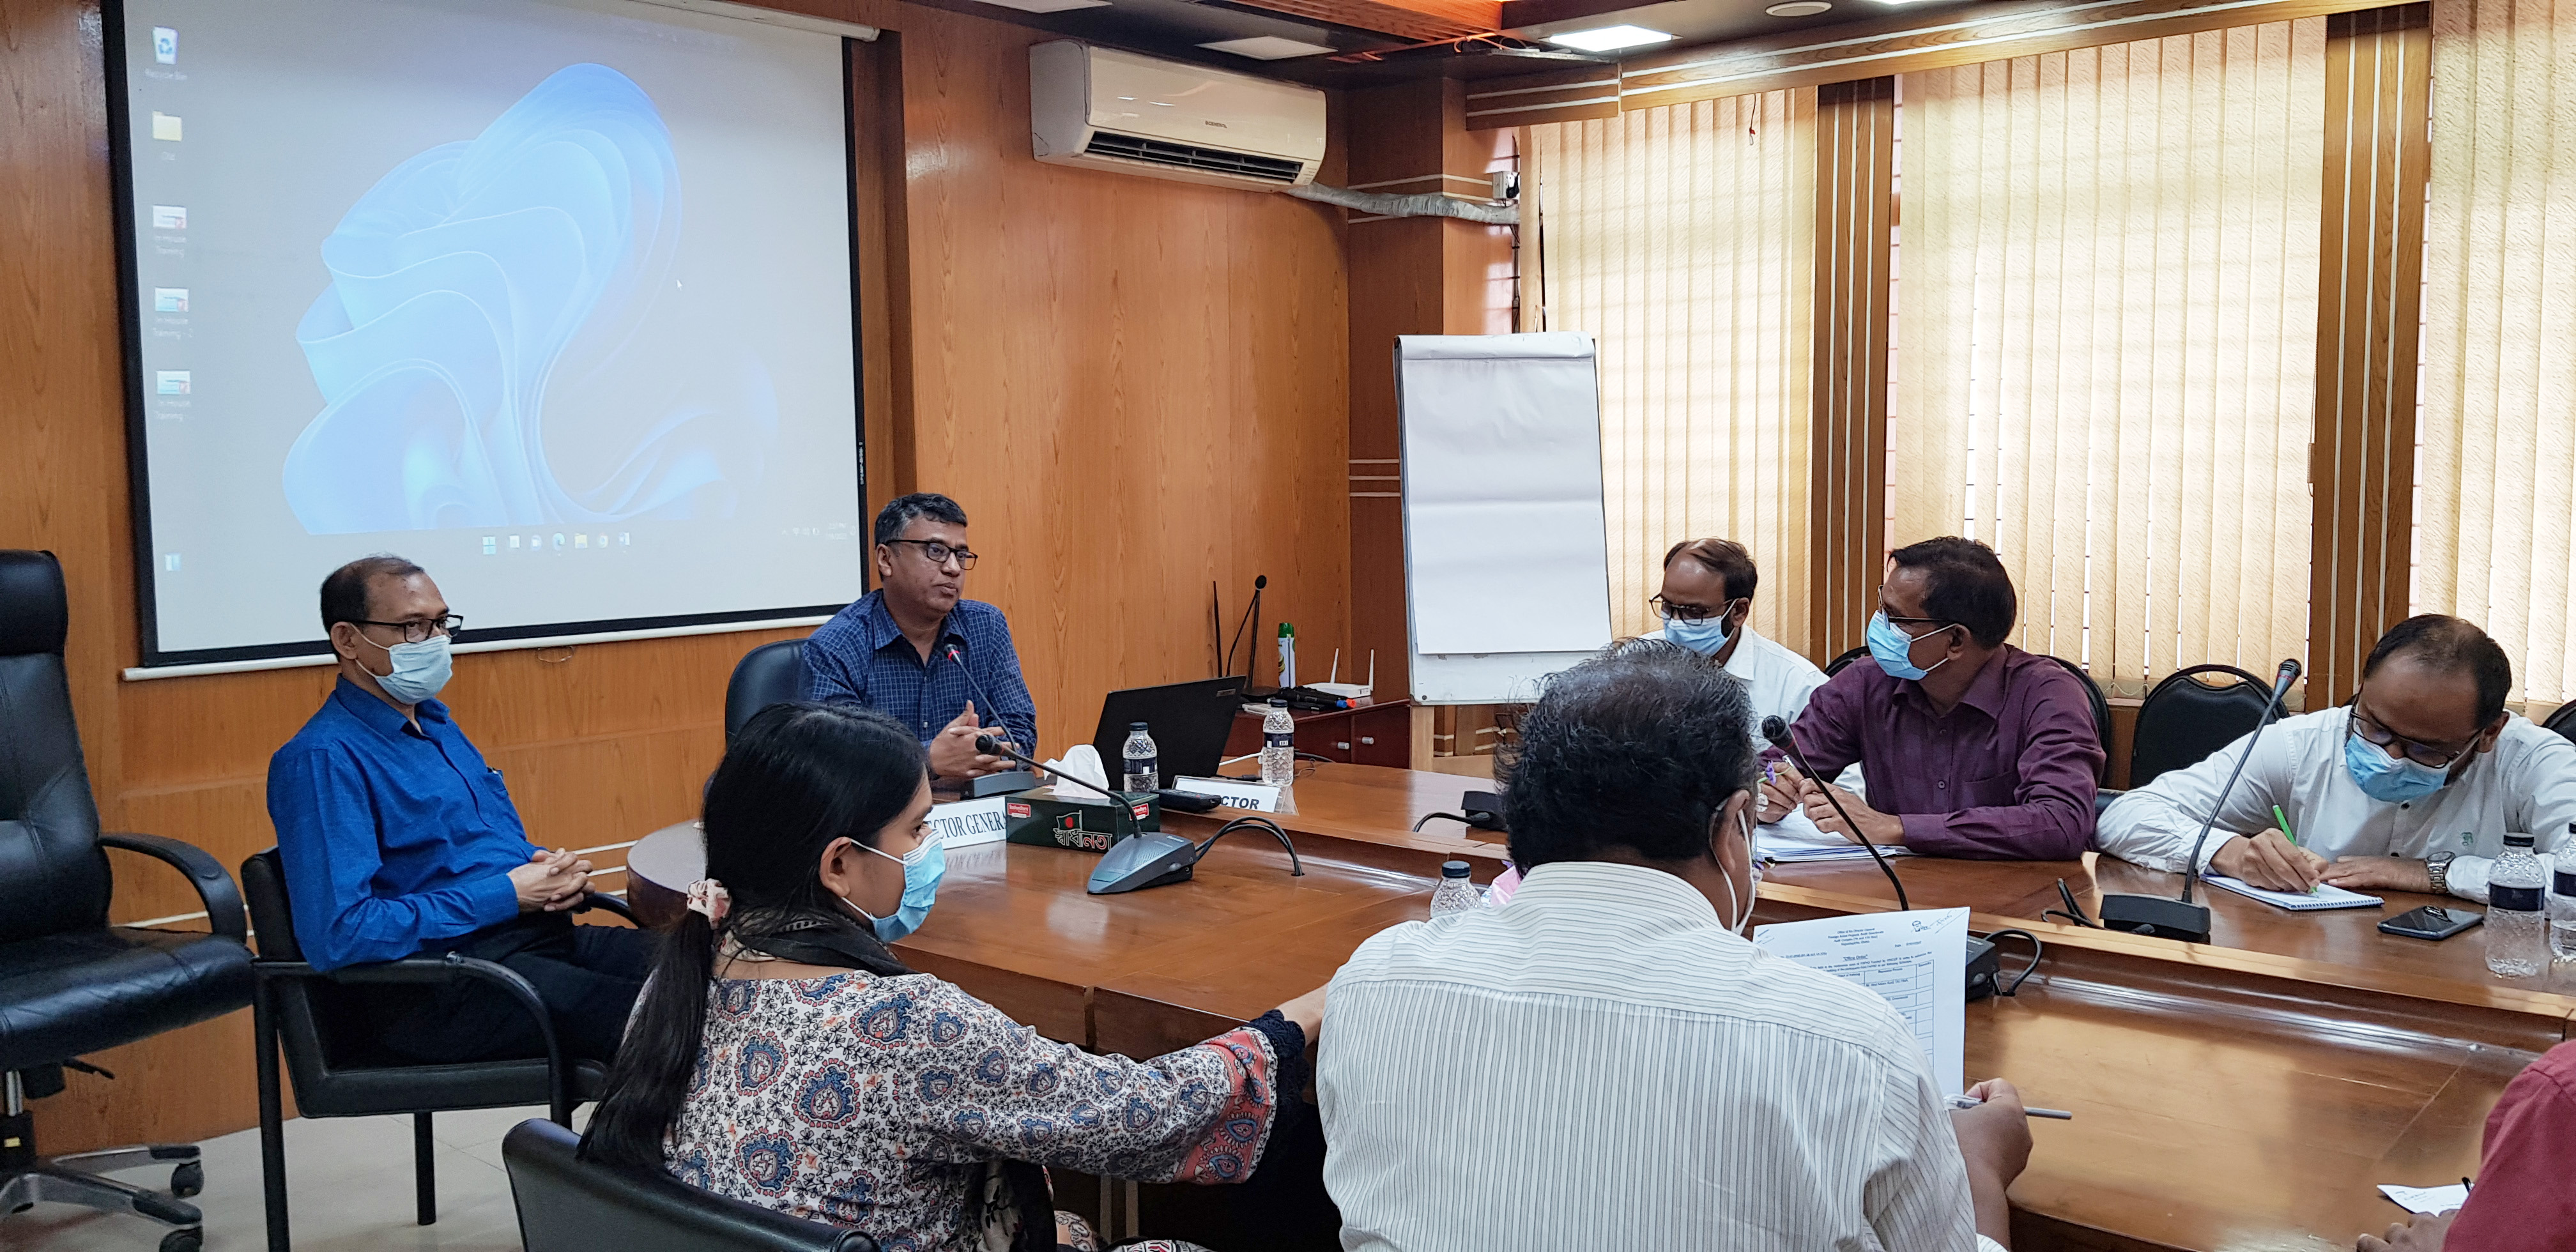 Honorable DG, FAPAD delivering his speech in In-house training at FAPAD Conference Room on 18.07.2022